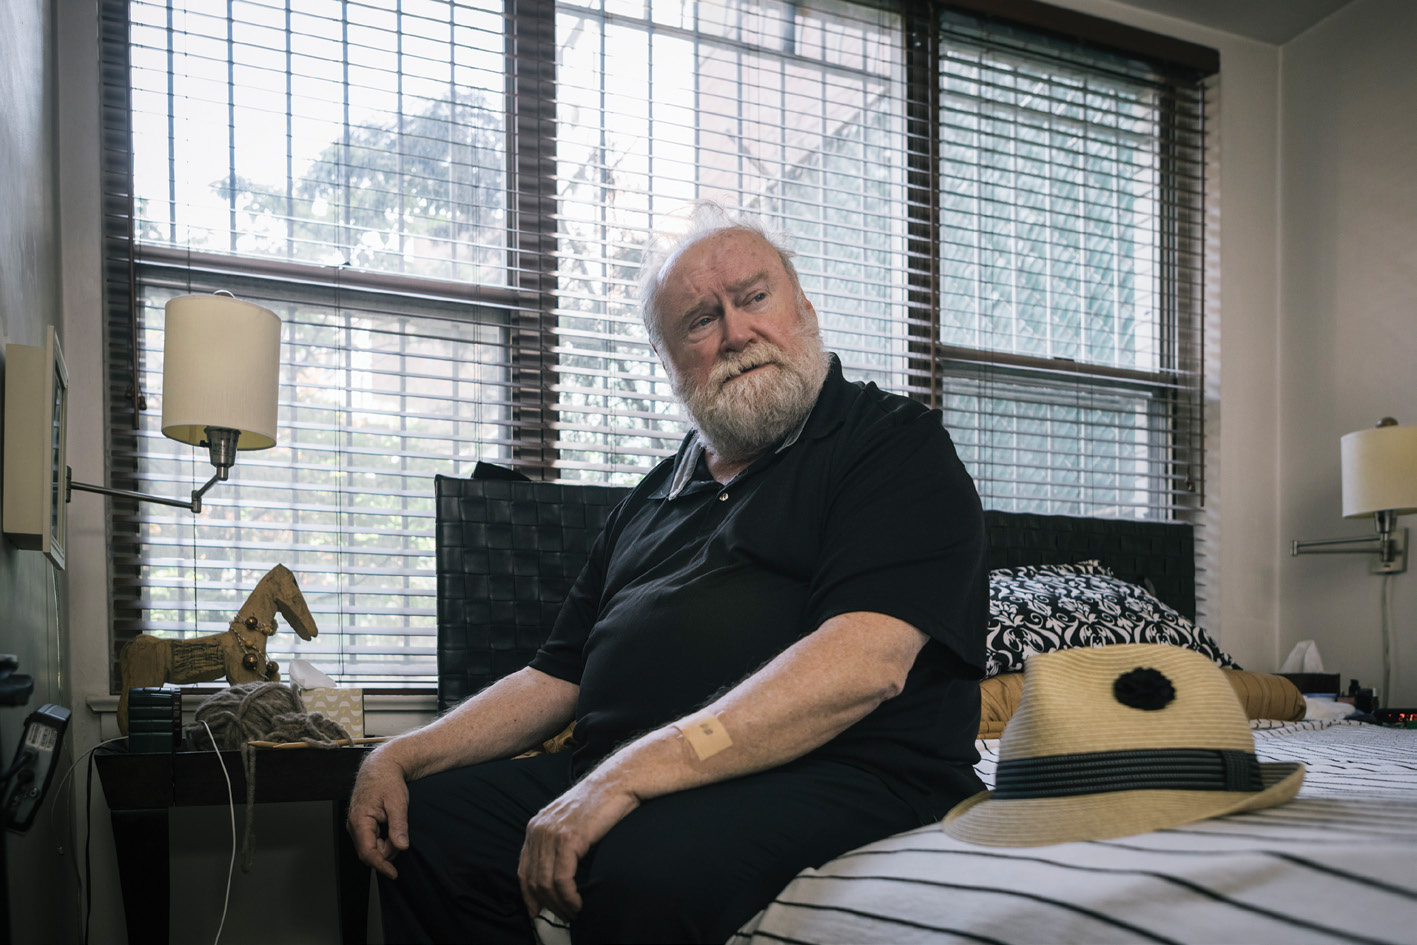 an older man with gray hair and a small bandage on his arm sits on a bed by the window